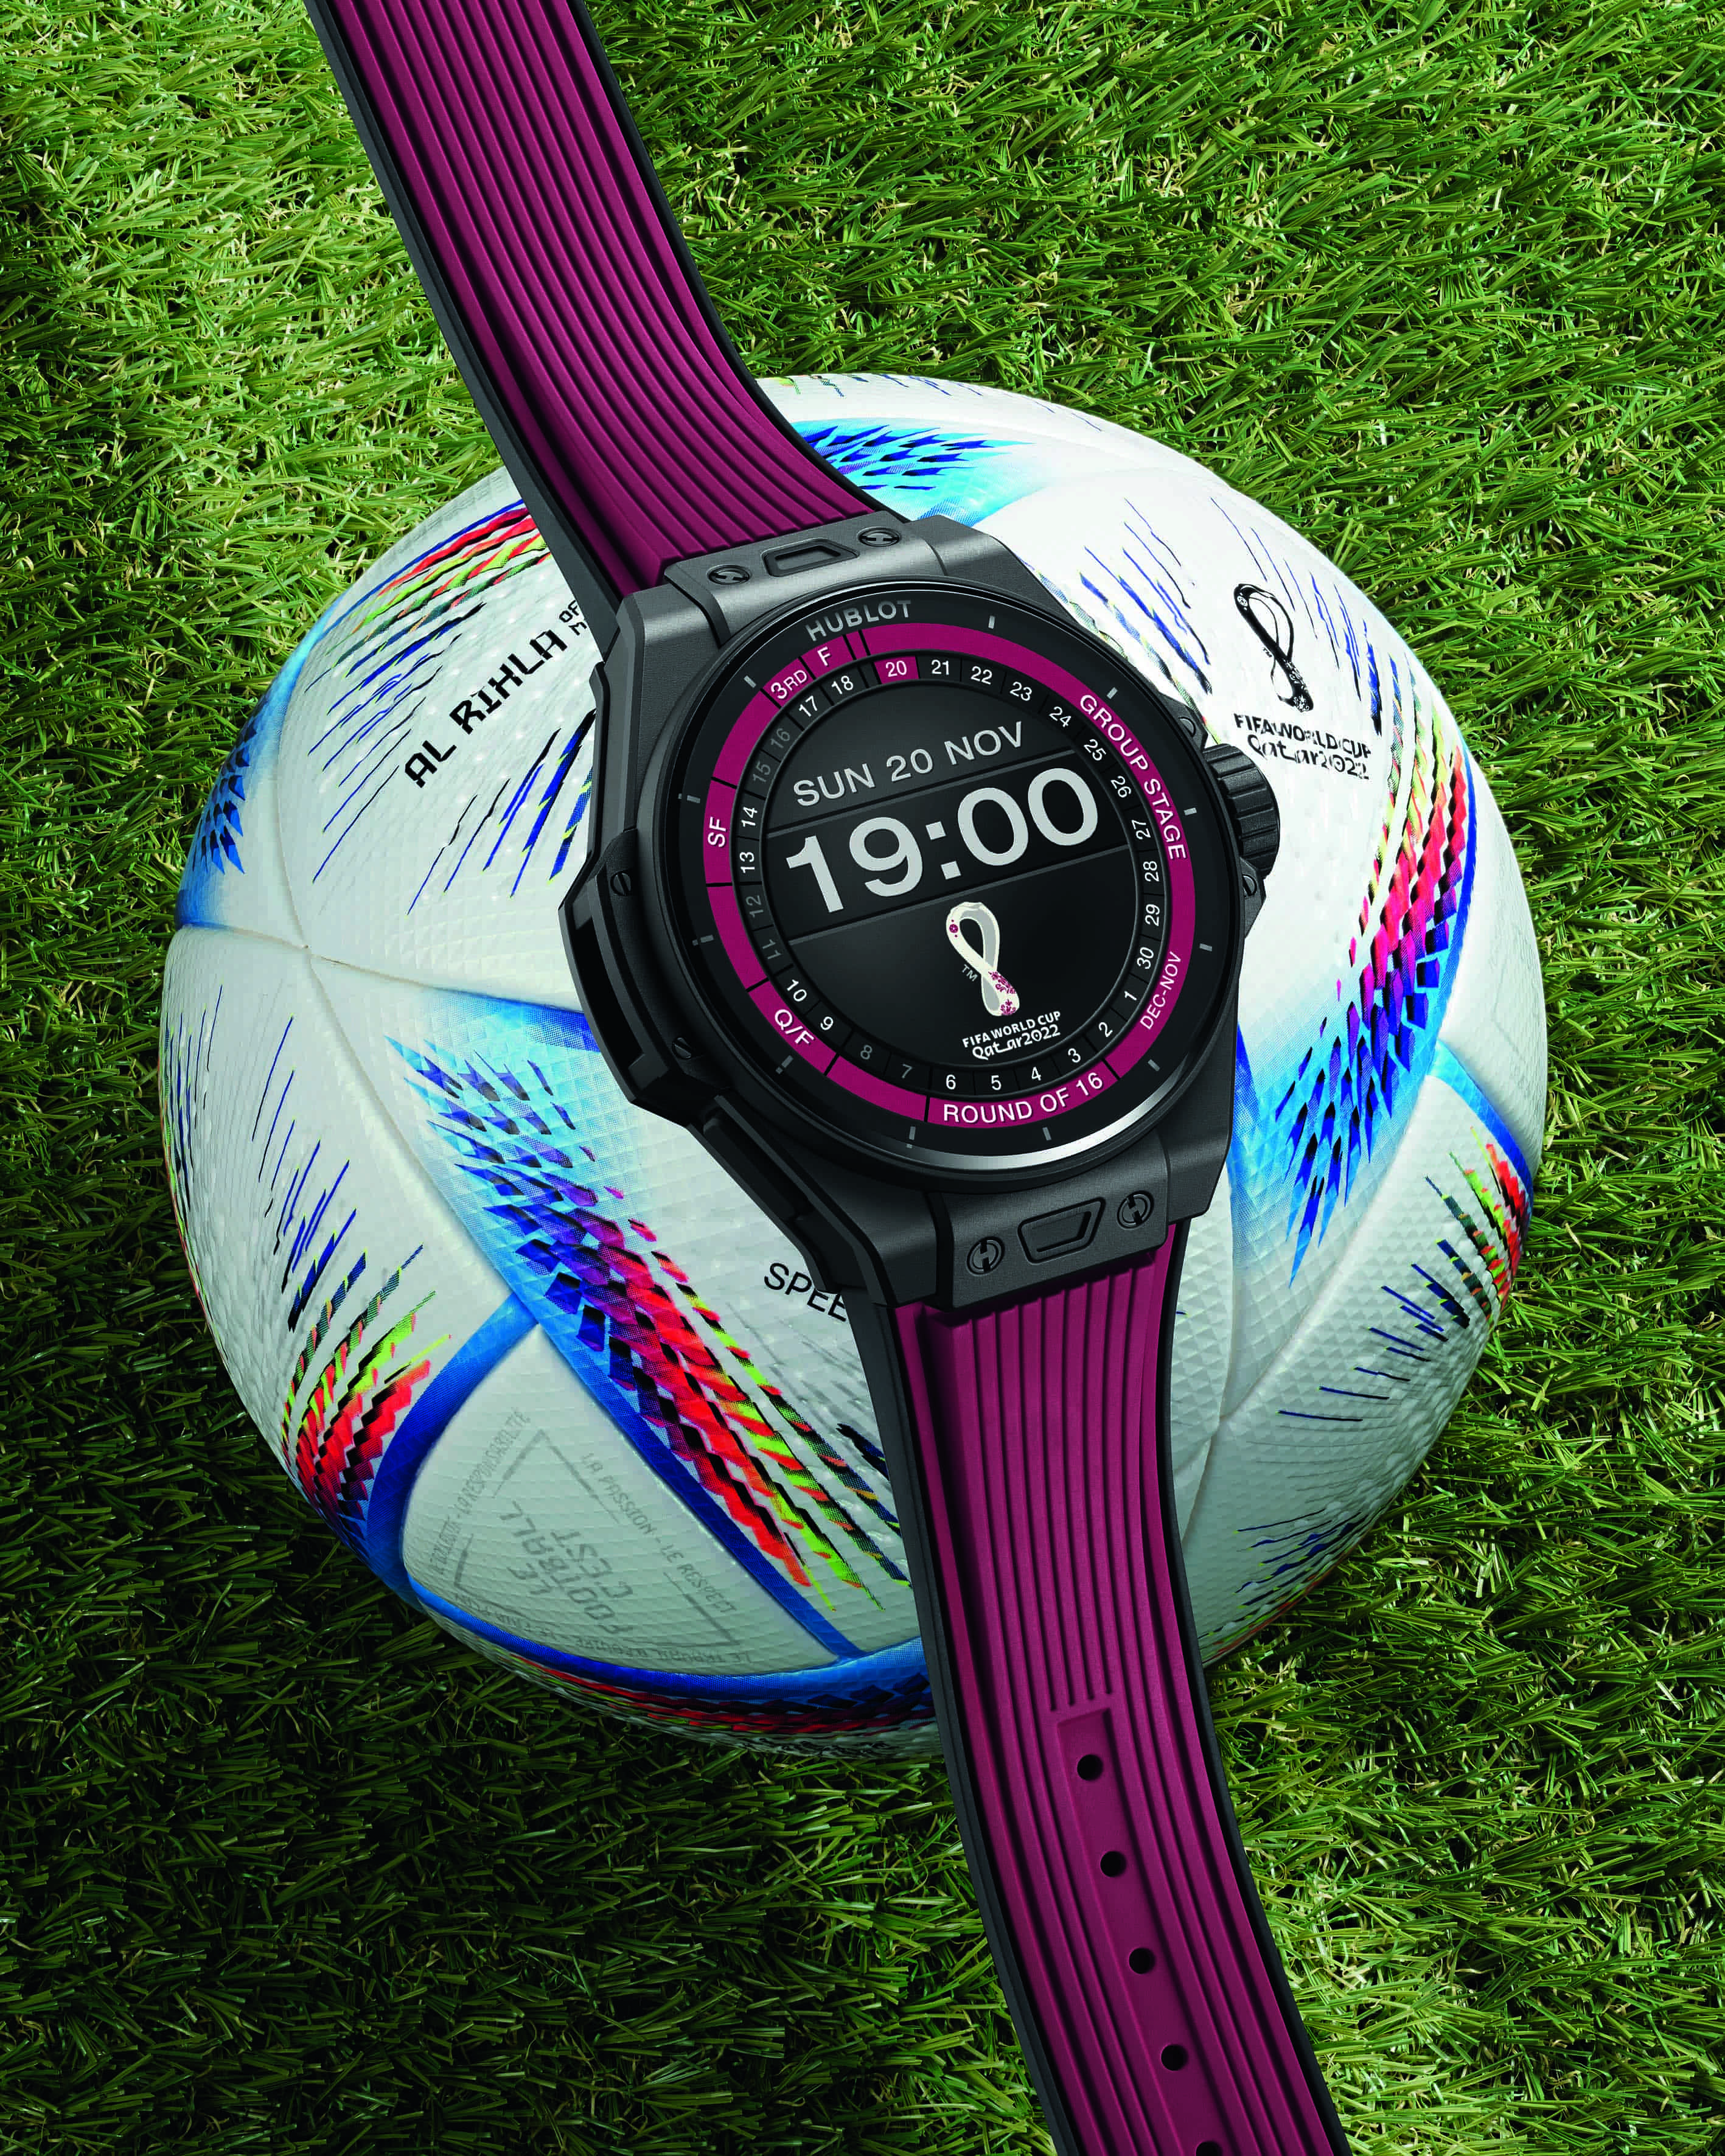 Hublot Gears Up For The 2018 FIFA World Cup In Russia